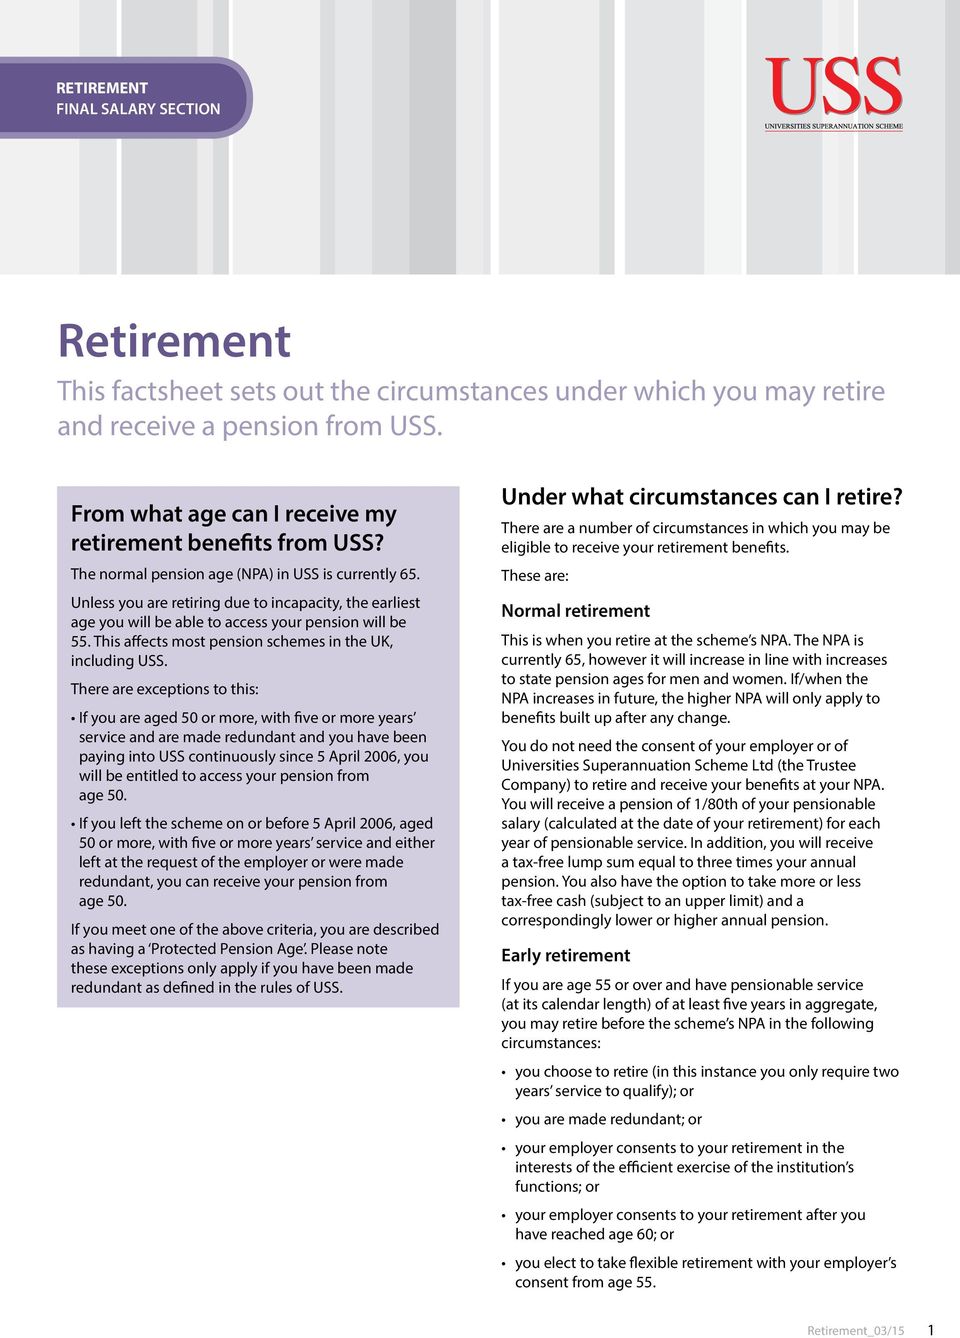 Unless you are retiring due to incapacity, the earliest age you will be able to access your pension will be 55. This affects most pension schemes in the UK, including USS.